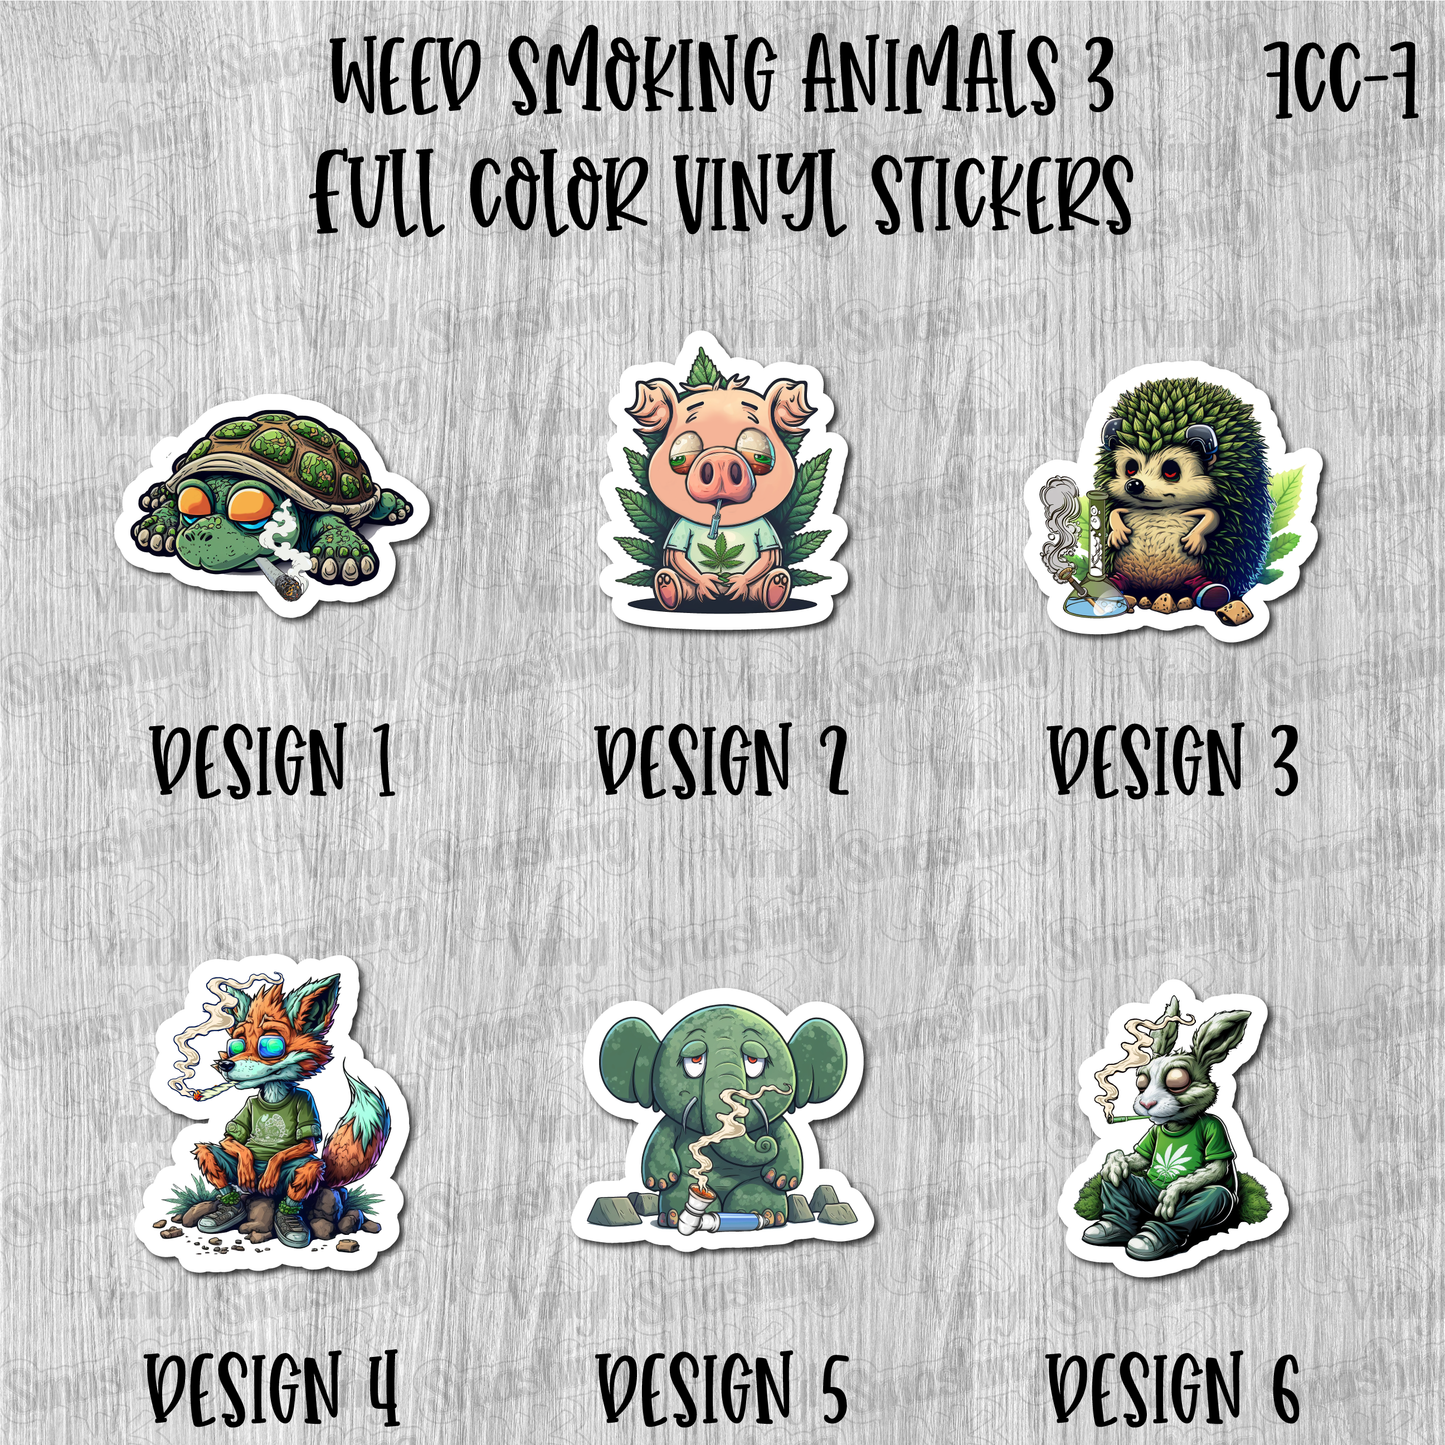 Weed Smoking Animals 3 - Full Color Vinyl Stickers (SHIPS IN 3-7 BUS DAYS)